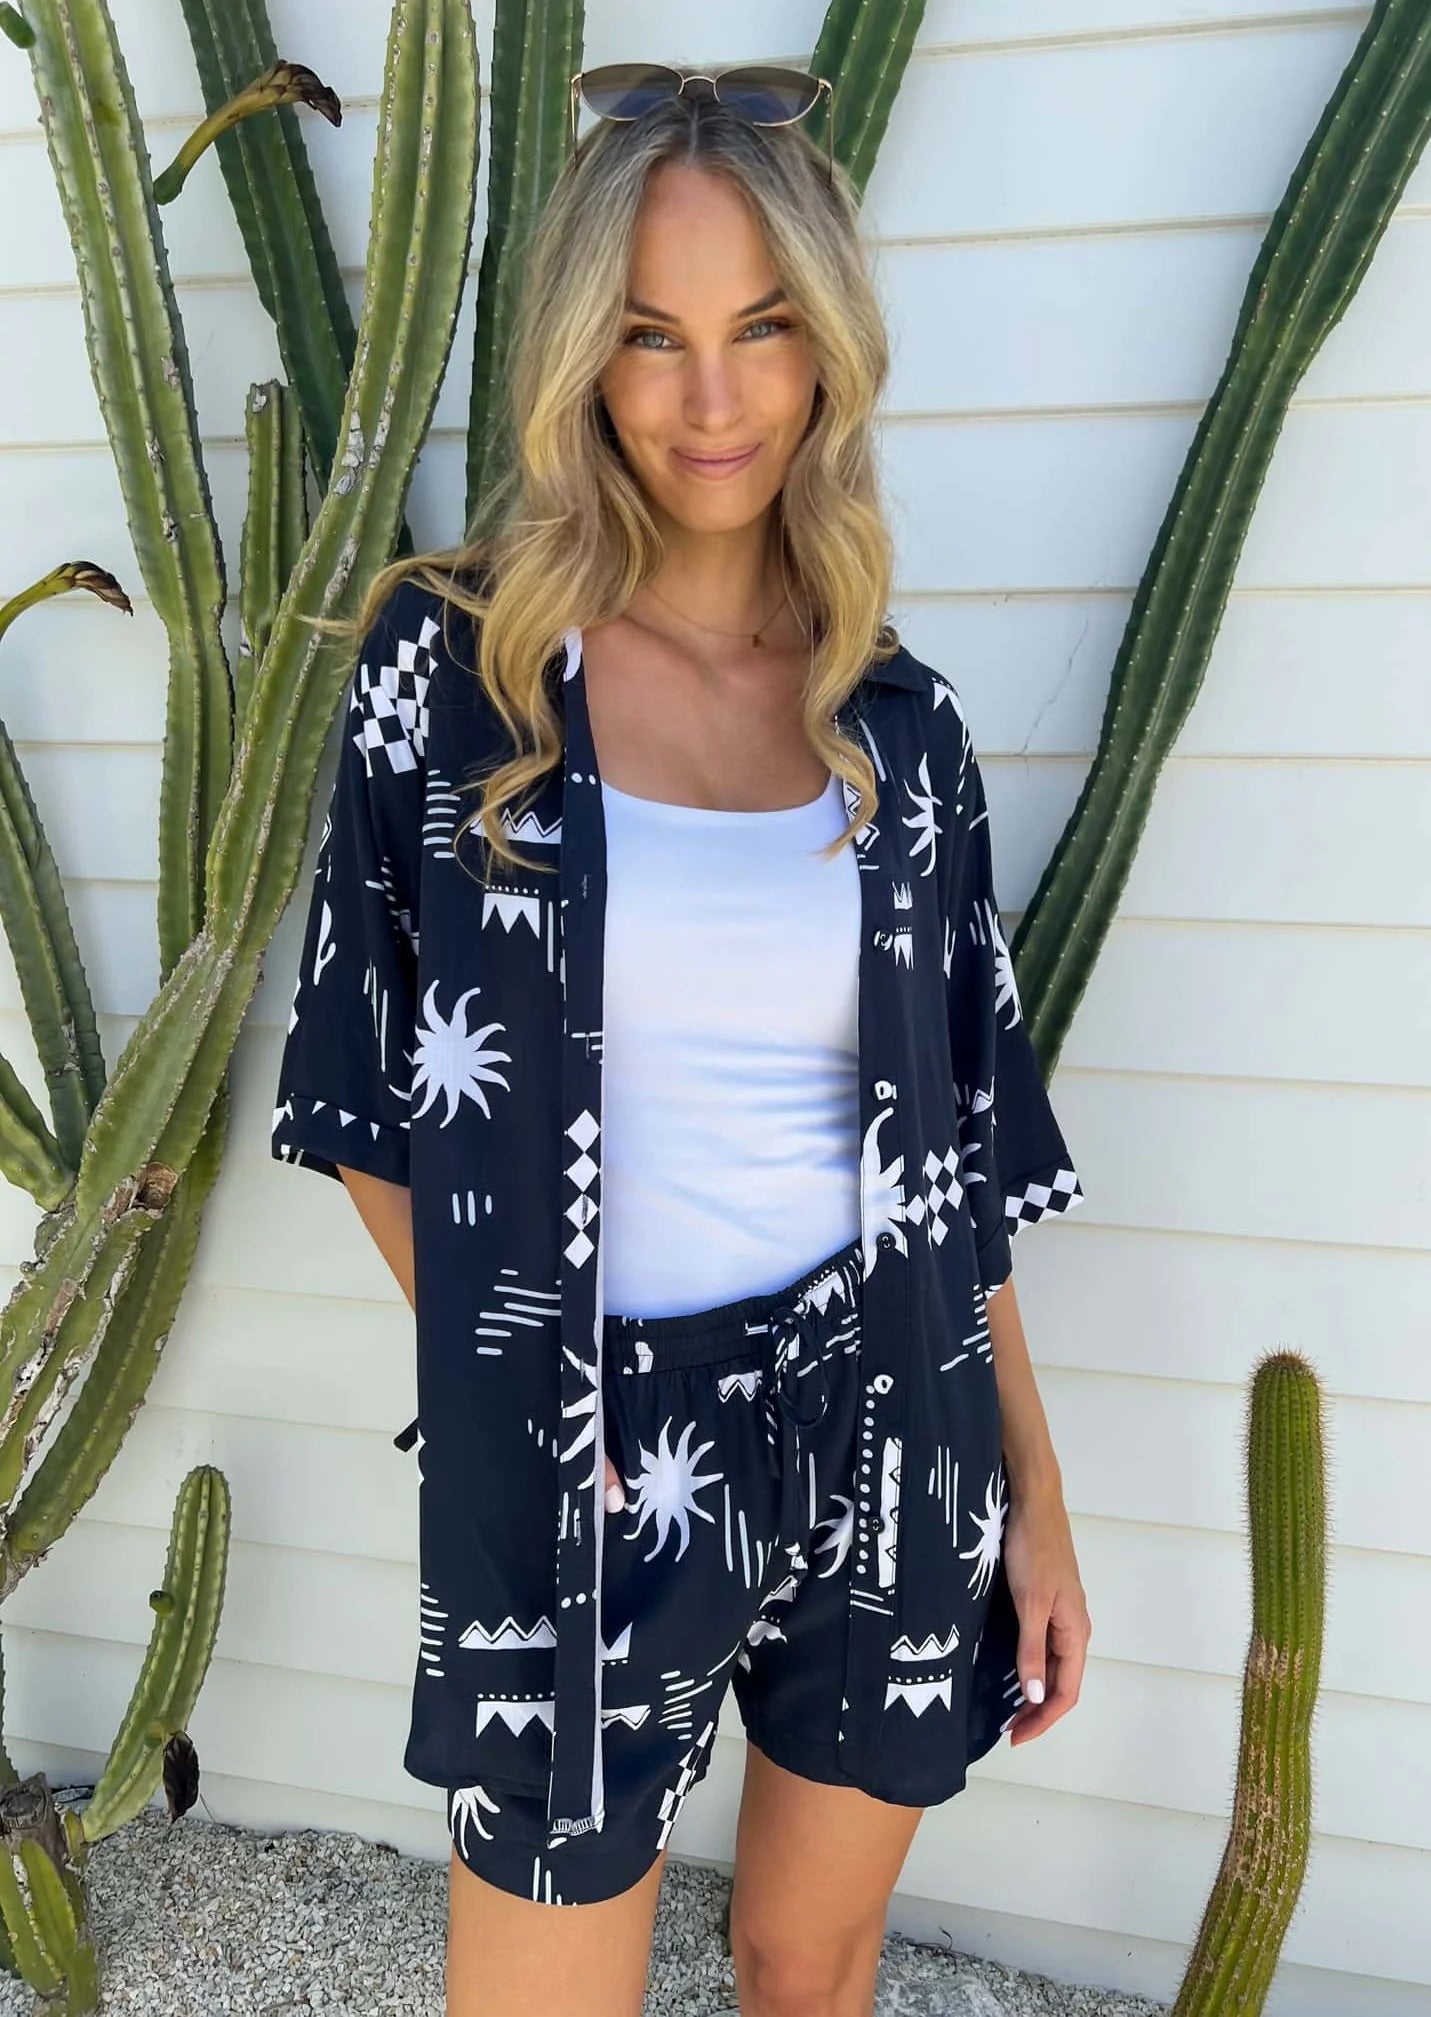 Stay cool and stylish with the Aria Set in Sol Navy Print! This set features an oversized top for ultimate comfort, functional buttons for easy wear, and a lined short with an elasticated and drawstring waist for the perfect fit. Don't forget the cute contrast rope drawstring for a touch of fun!